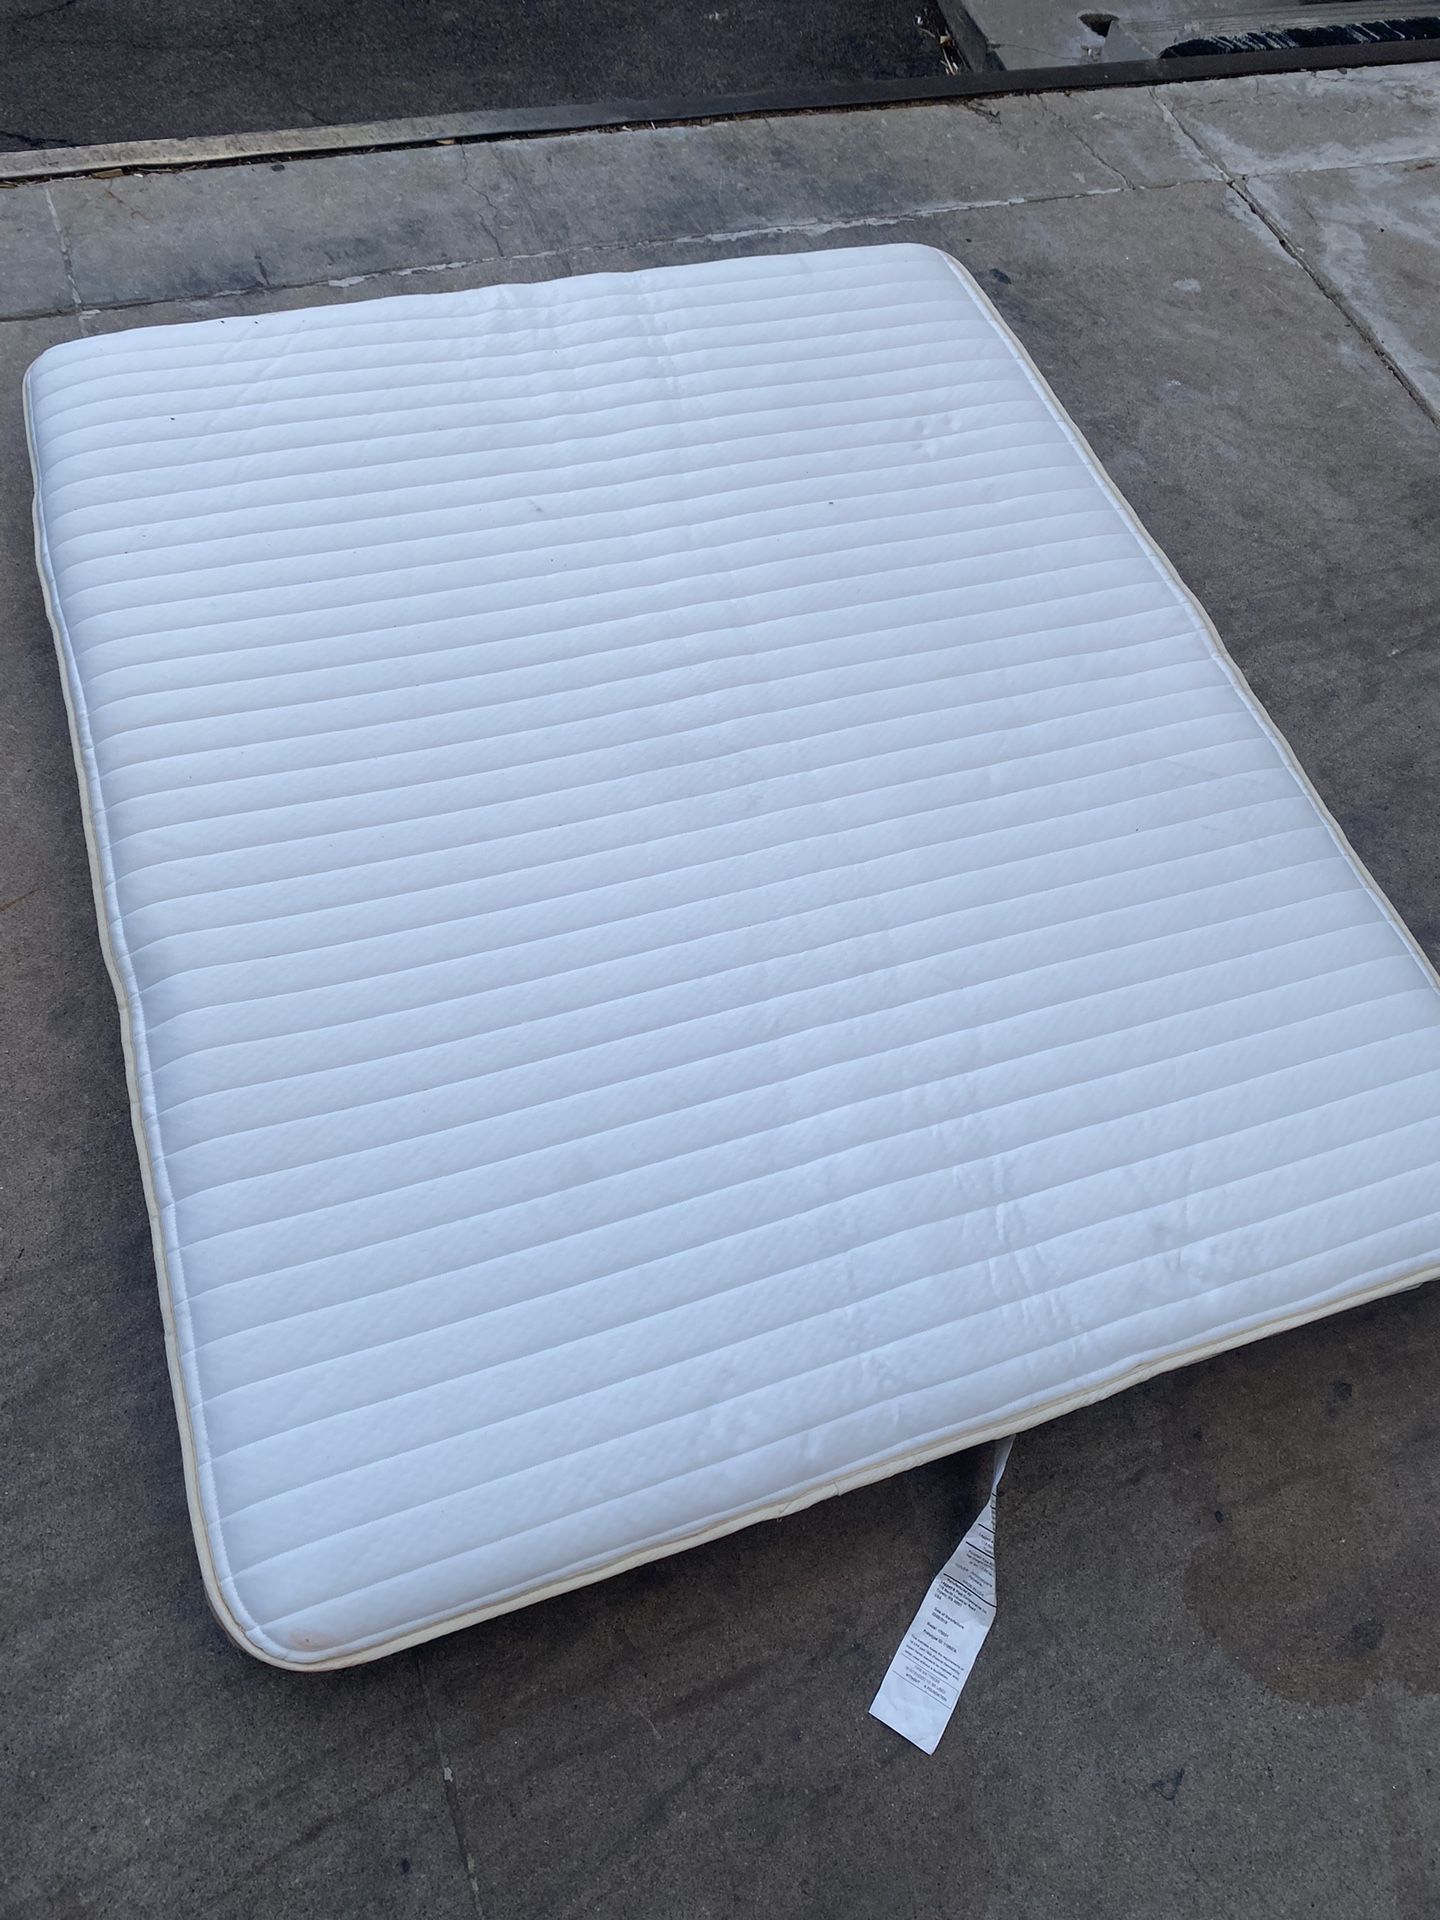 Rv Mattress Or Pull Out Bed Couch  Mattress Full